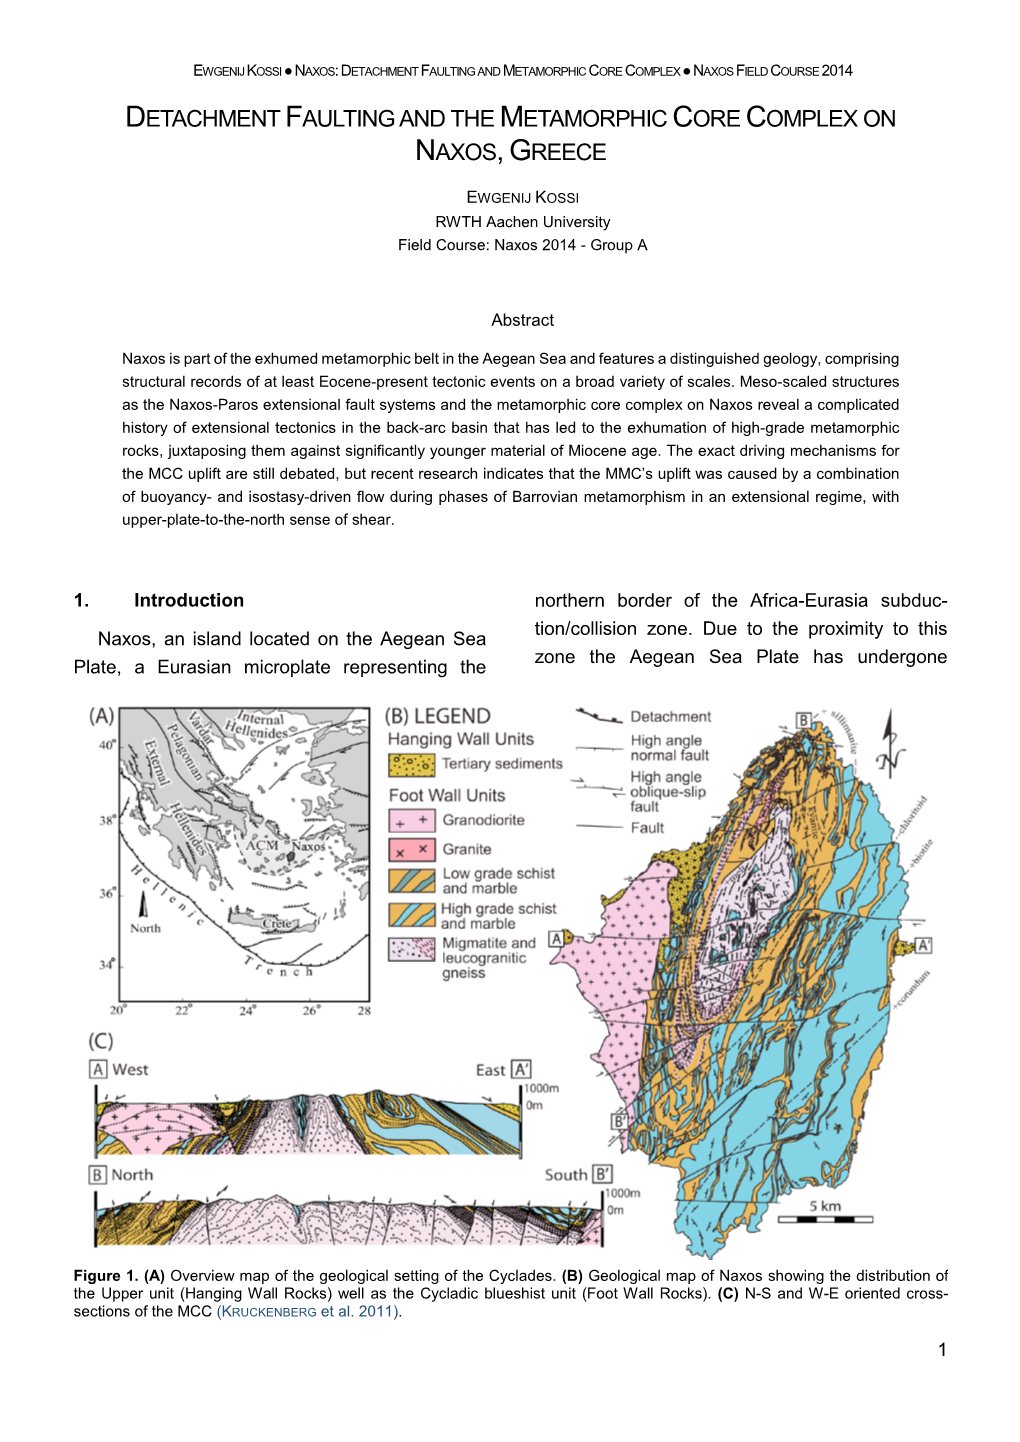 Detachment Faulting and the Metamorphic Core Complex on Naxos, Greece